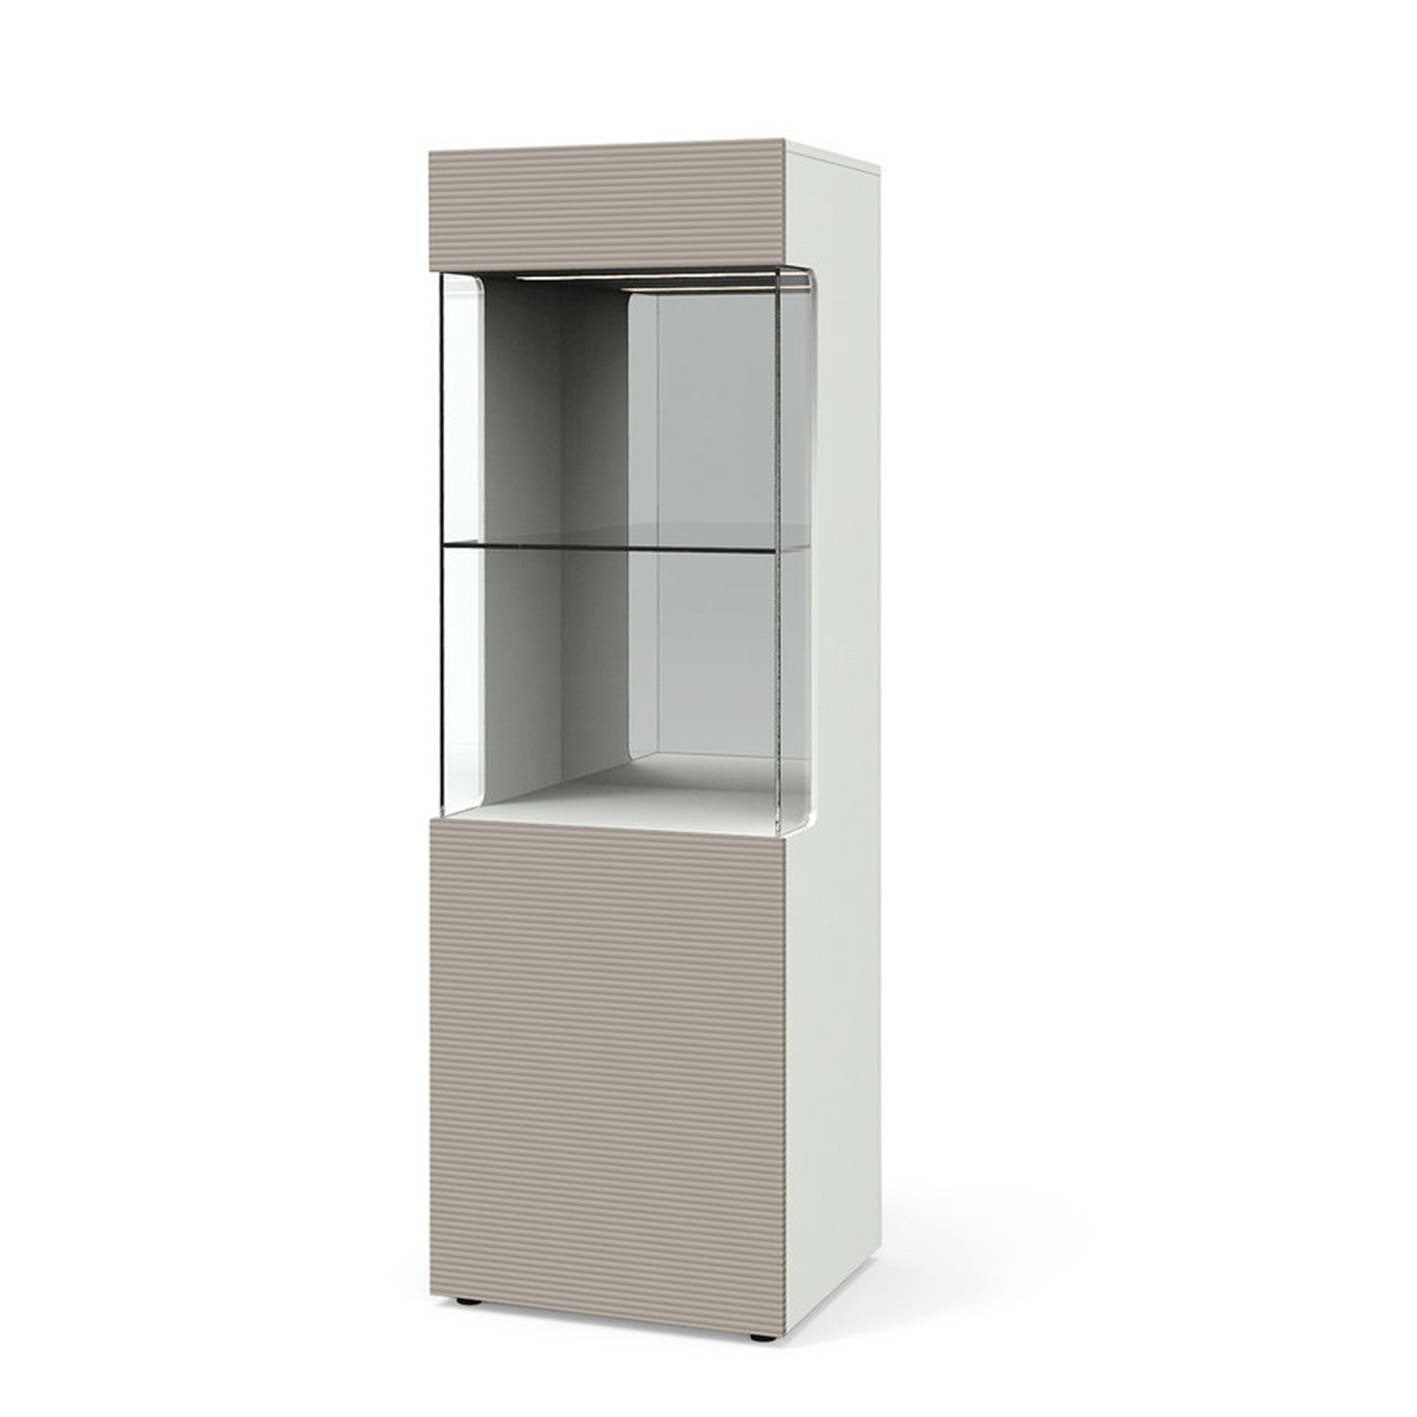 shopping mall or office use displaying storage locker cabinet with glass open door